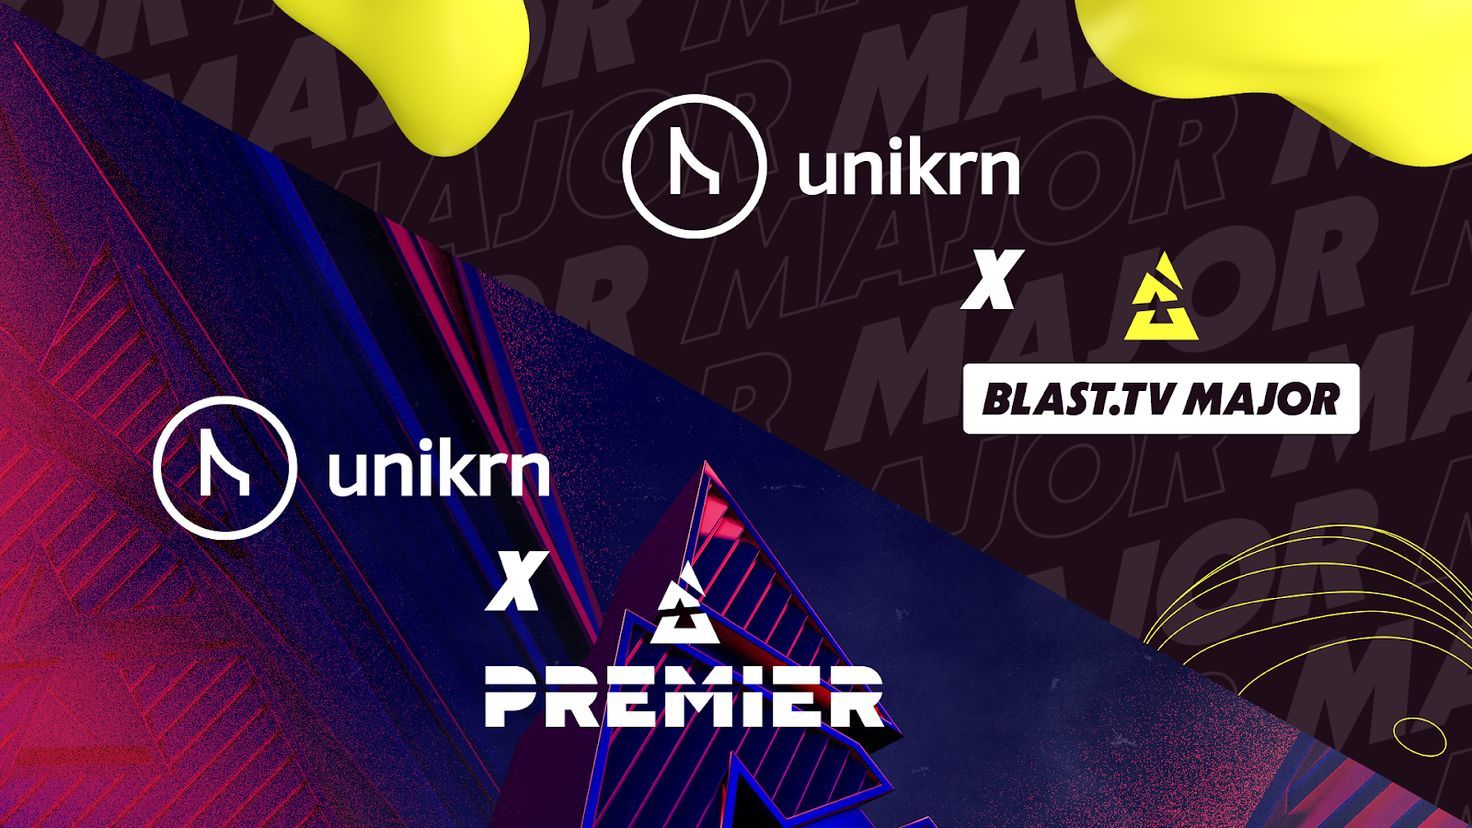 BLAST has signed a partnership agreement with the betting platform Unikrn